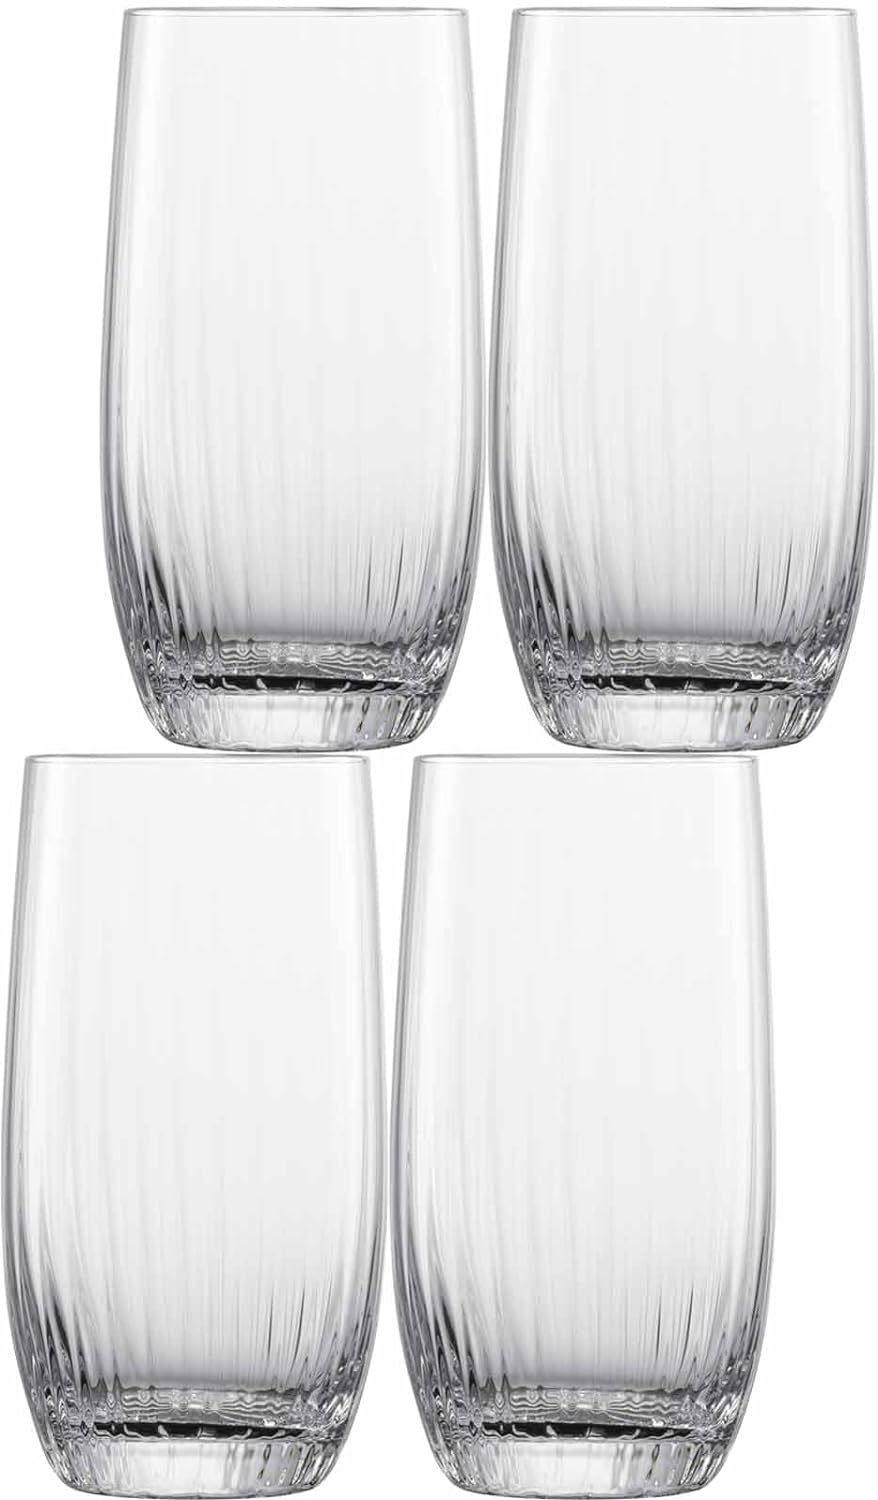 Zwiesel Glas Fortune 122326 Long Drink Glass Made of High-Quality Glass, Set of 4, Height: 14.6 cm, Diameter: 77.5 mm, Volume: 499 ml